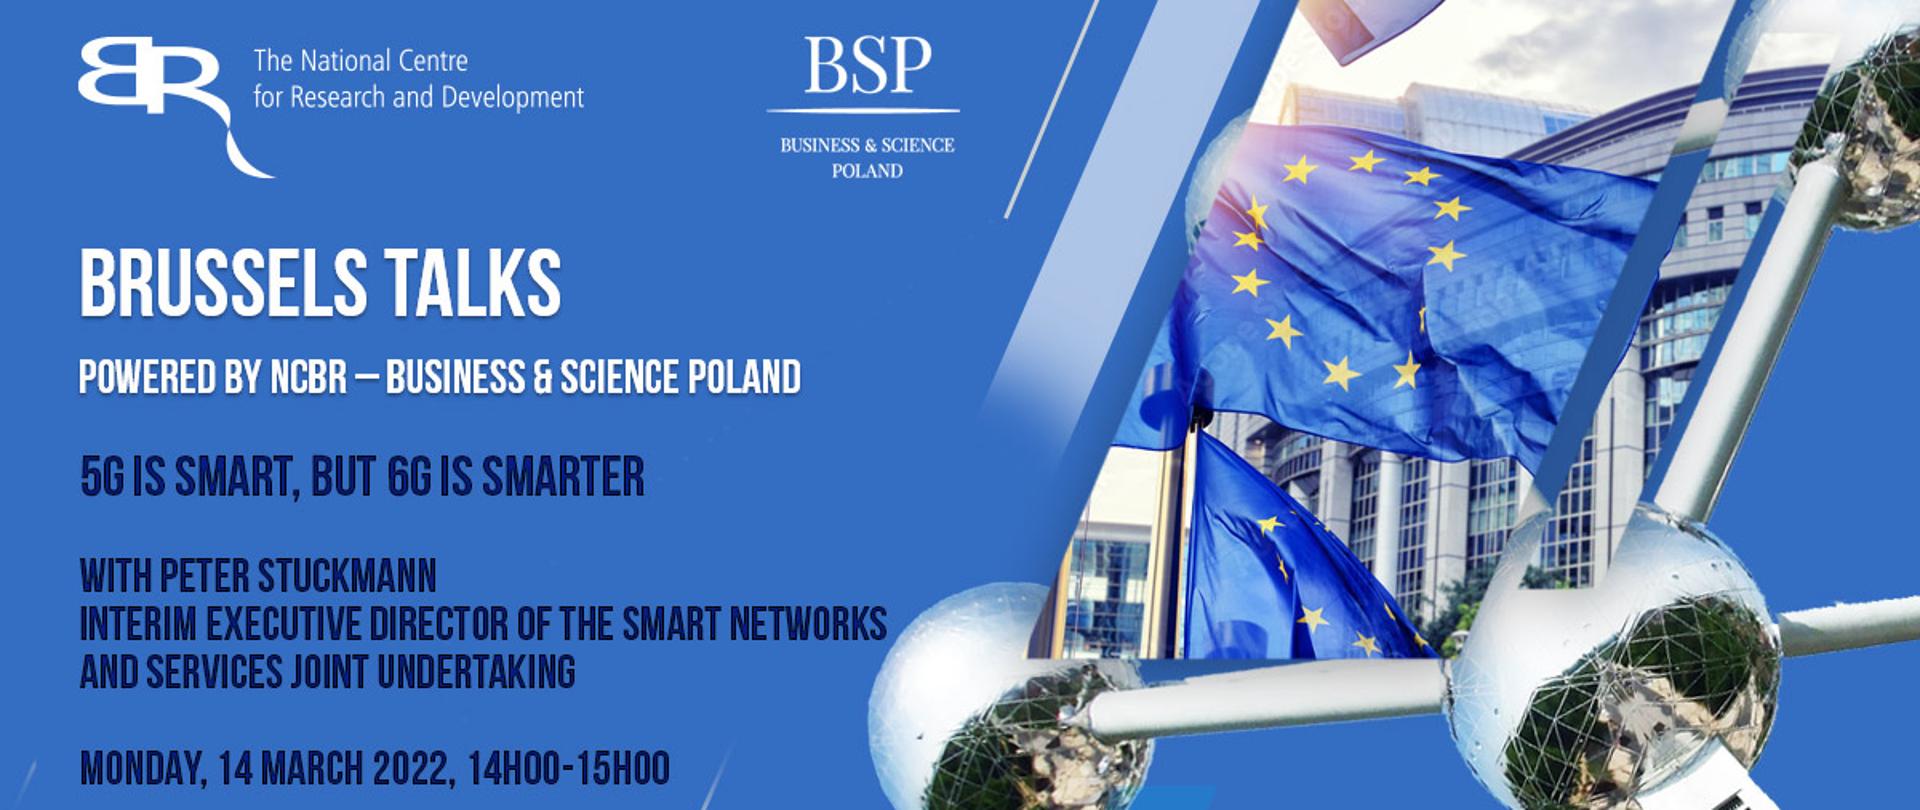 5G is smart, but 6G is smarter - Brussels Talks nt. Smart Networks and Services Joint Undertaking